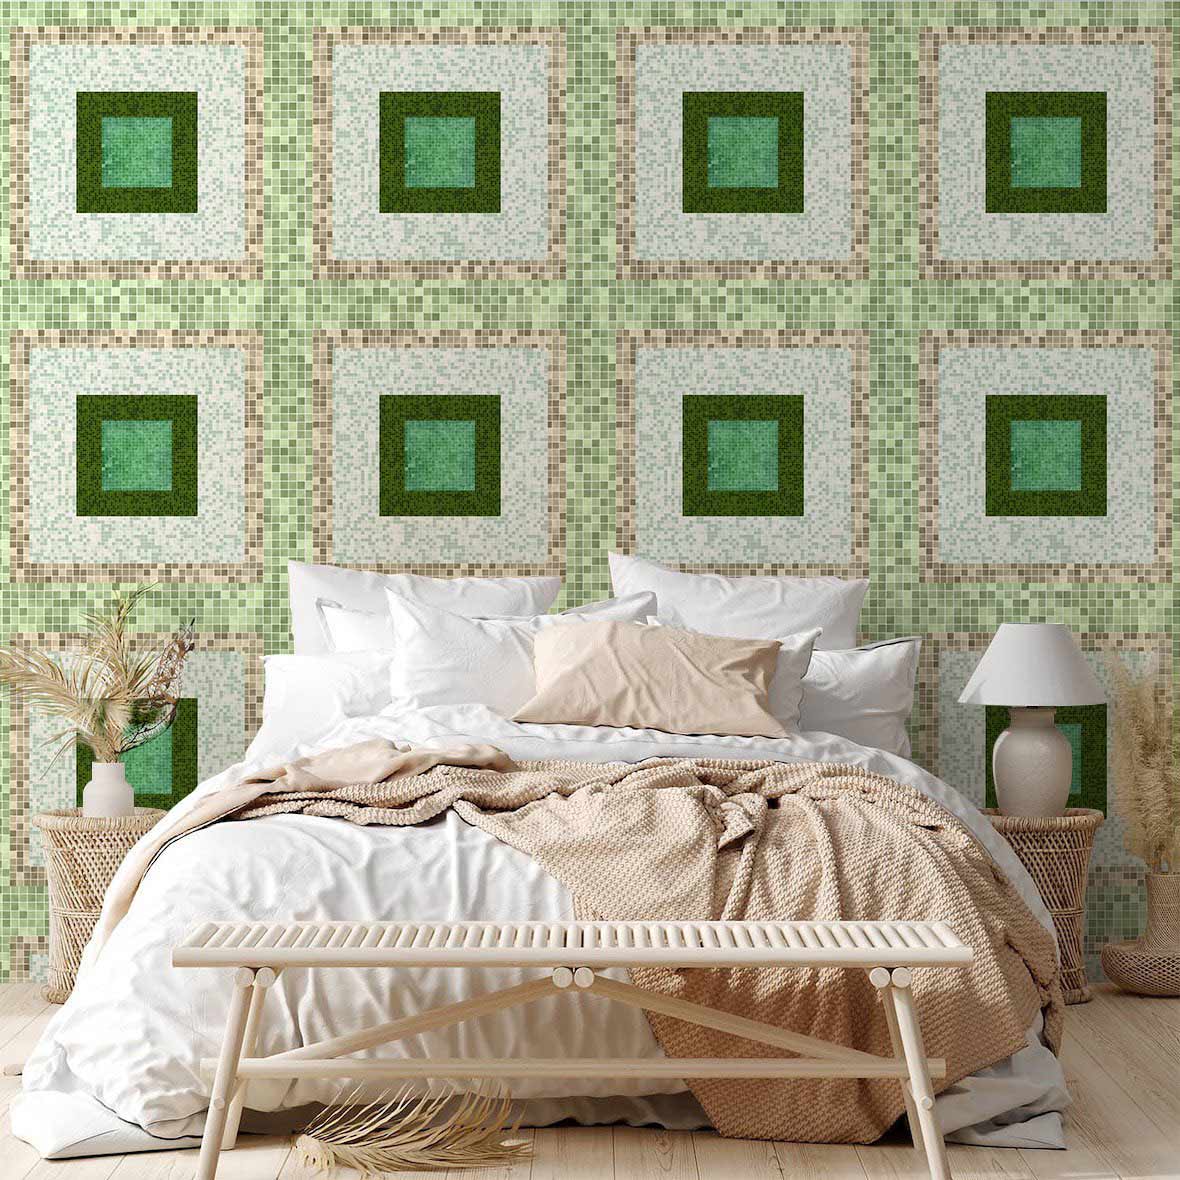 Green Squares Mosaic Wallpaper Mural for the Bedside